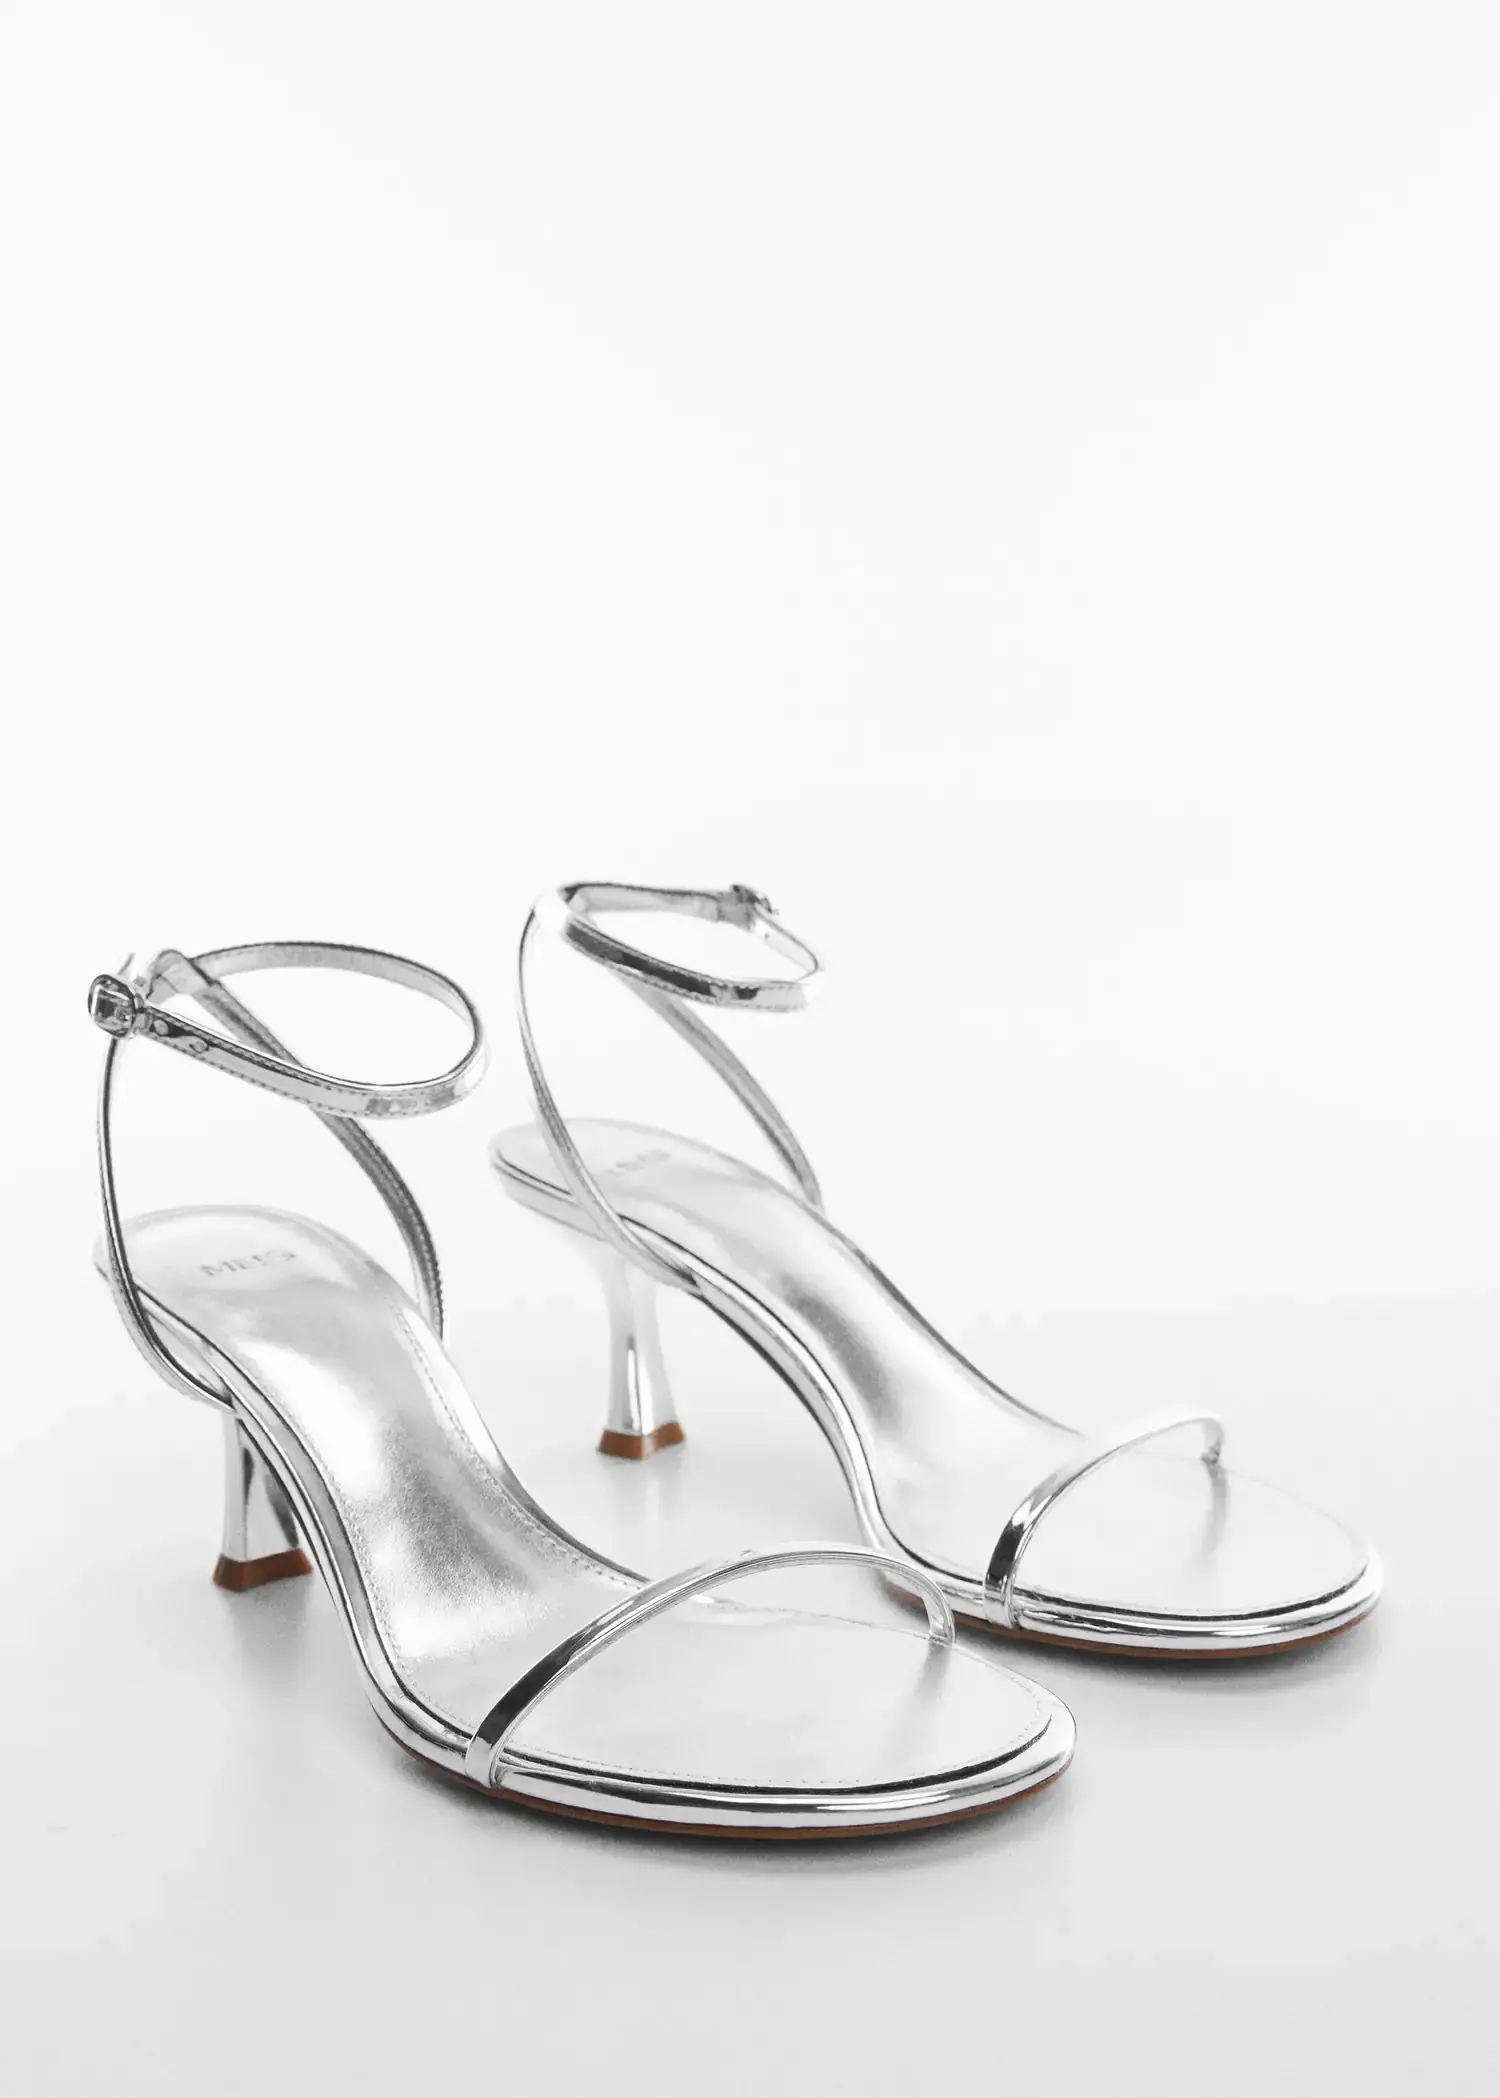 Mango Metallic heel sandals. a pair of shiny silver heels on a white surface. 